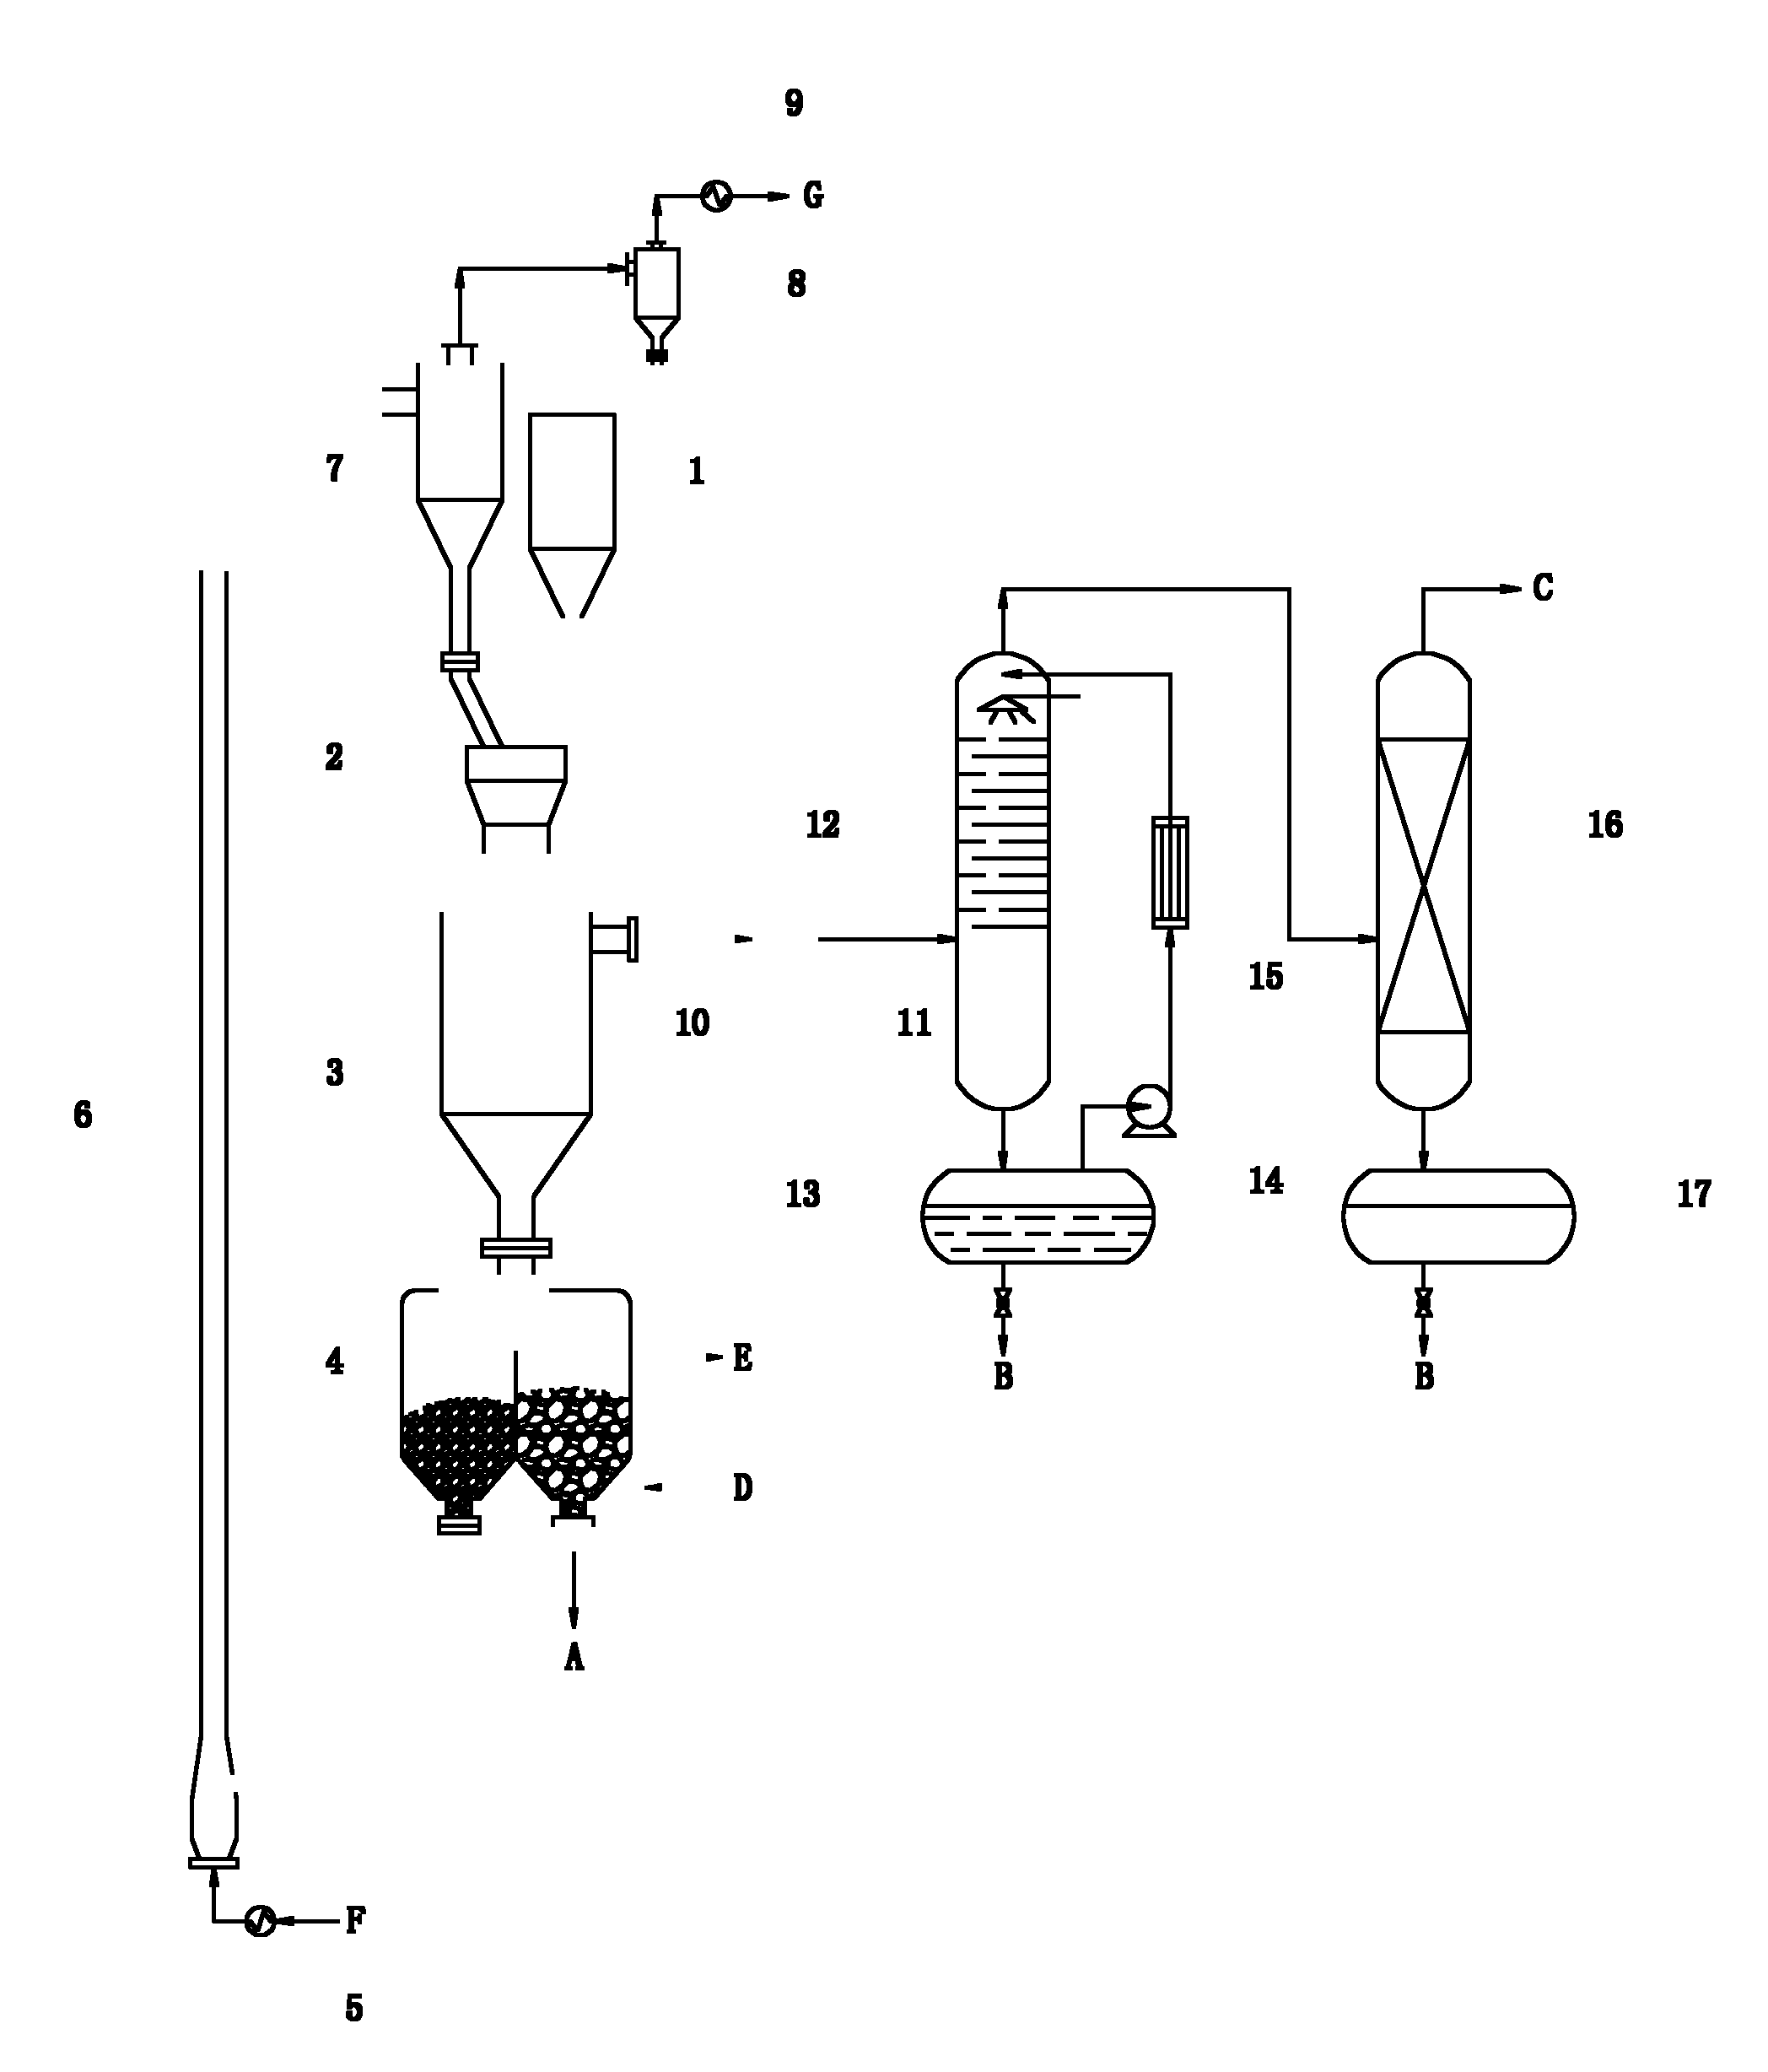 Method for preparing semicoke, empyreumatic oil and coal gas by pyrolyzing coal